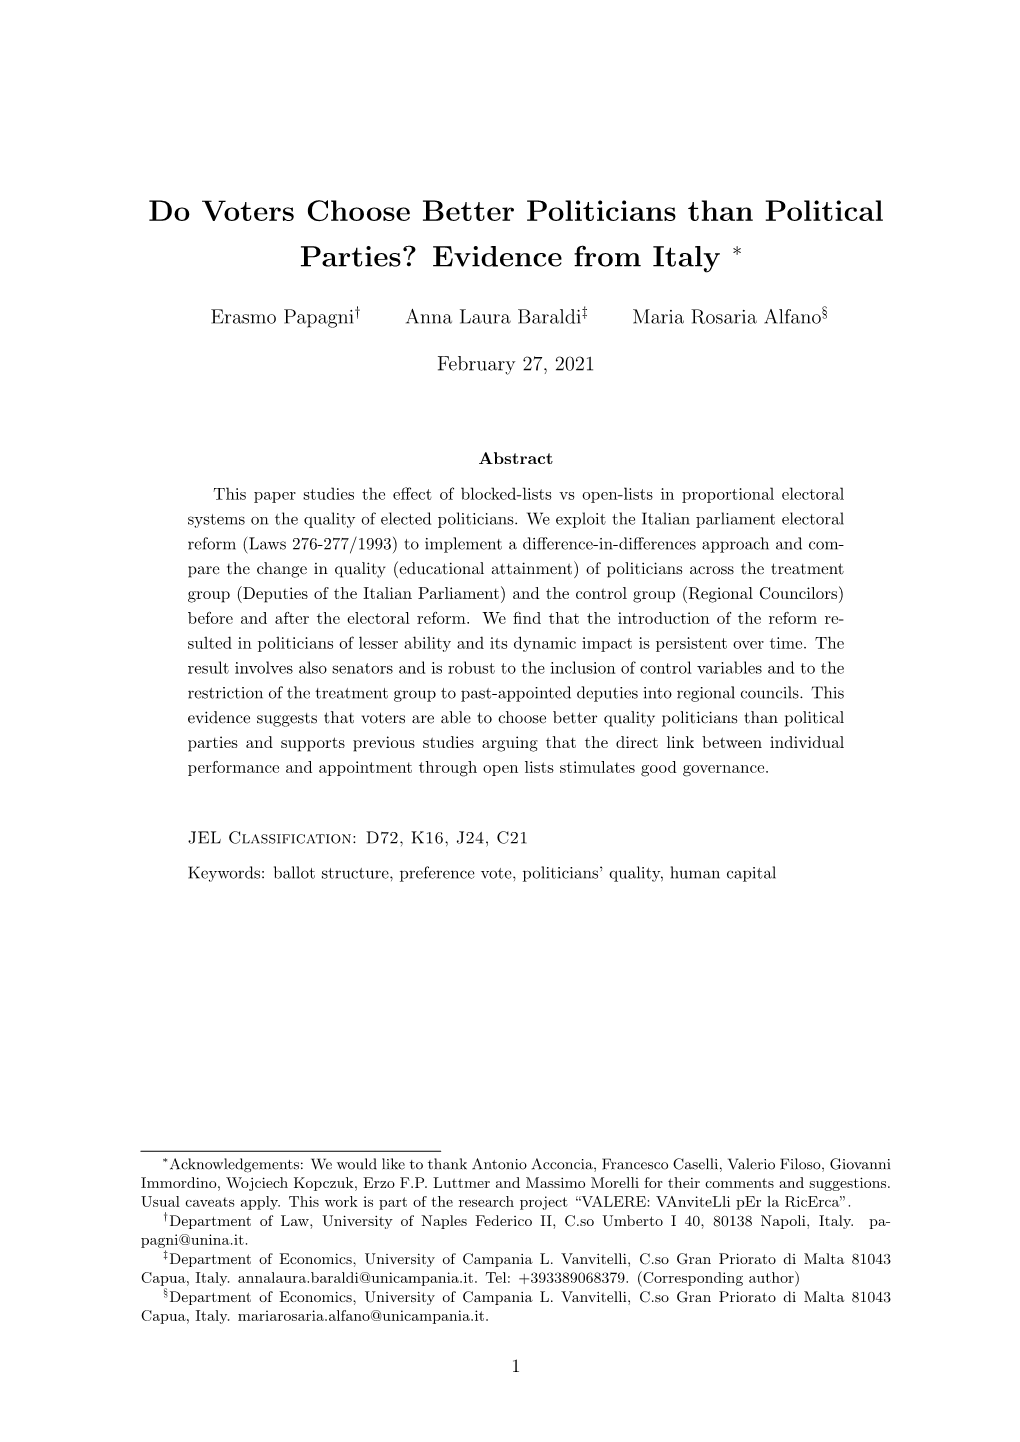 Do Voters Choose Better Politicians Than Political Parties? Evidence from Italy ∗